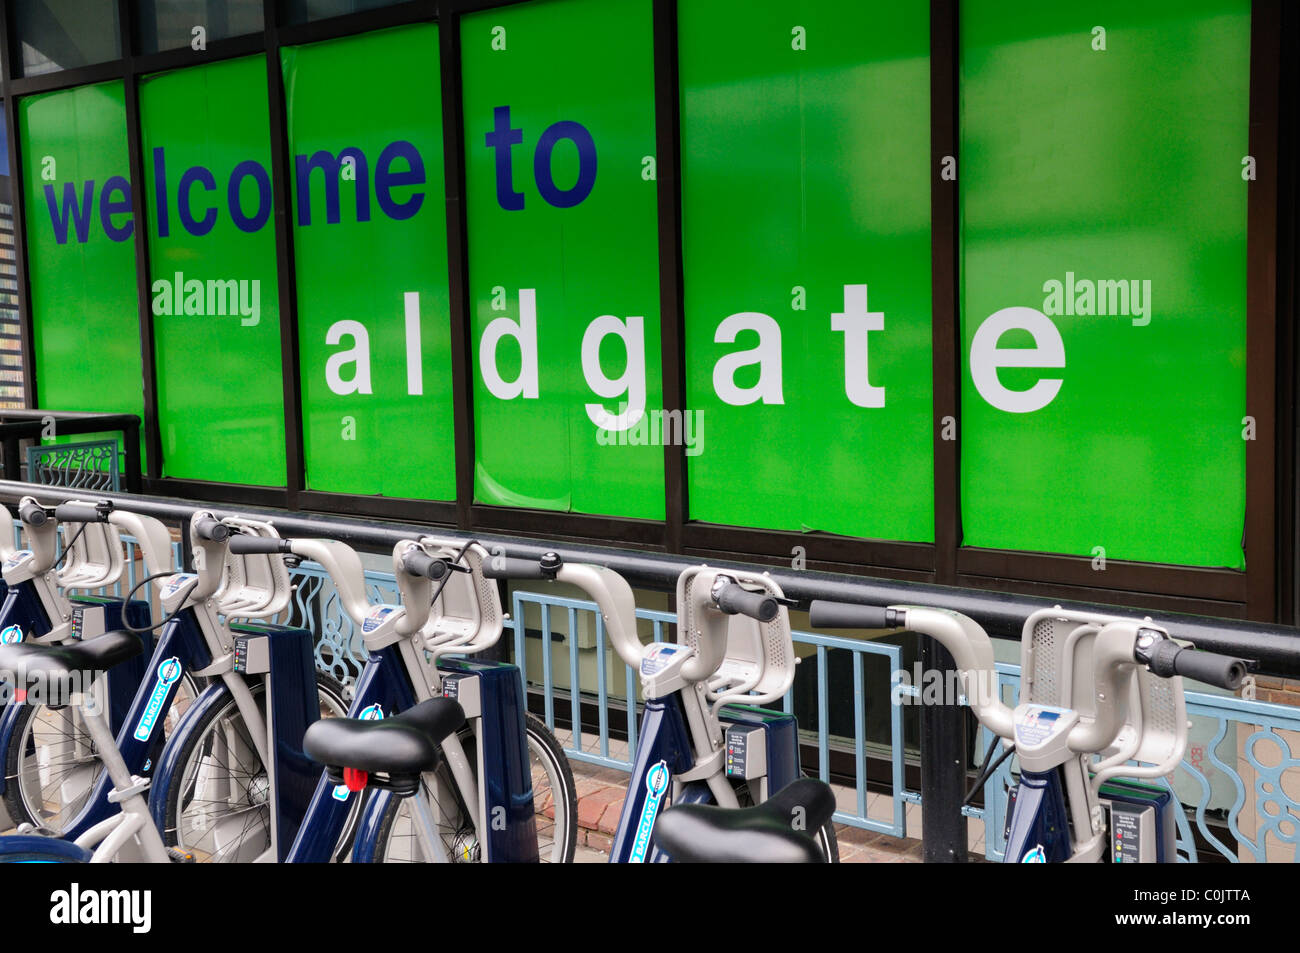 Welcome to Aldgate Sign with Barclays Cycle Hire Scheme Bicycles, Aldgate, London, England, UK Stock Photo